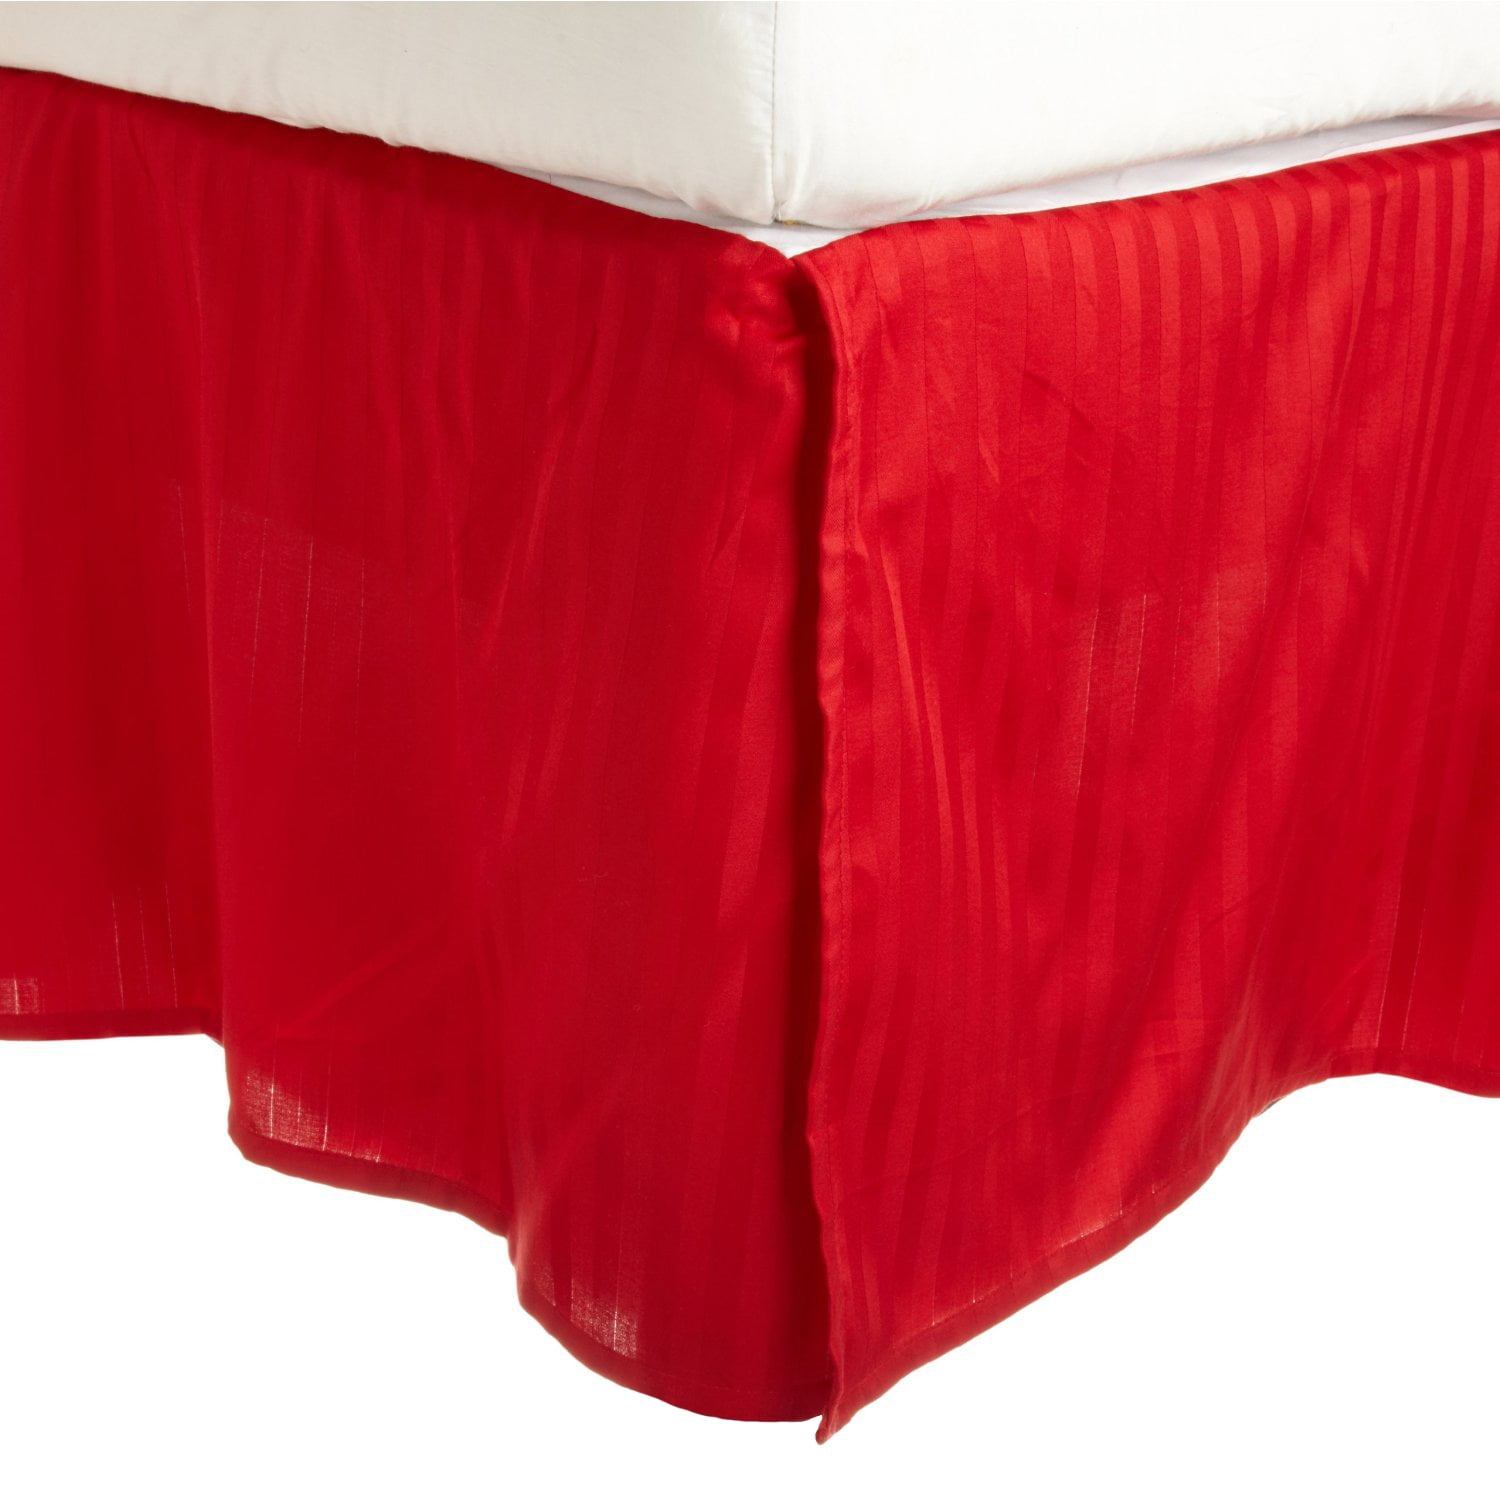 FAST FREE HOLIDAY SHIPPING 300 Thread Count Sateen Stripe Tailored Bed Skirt 